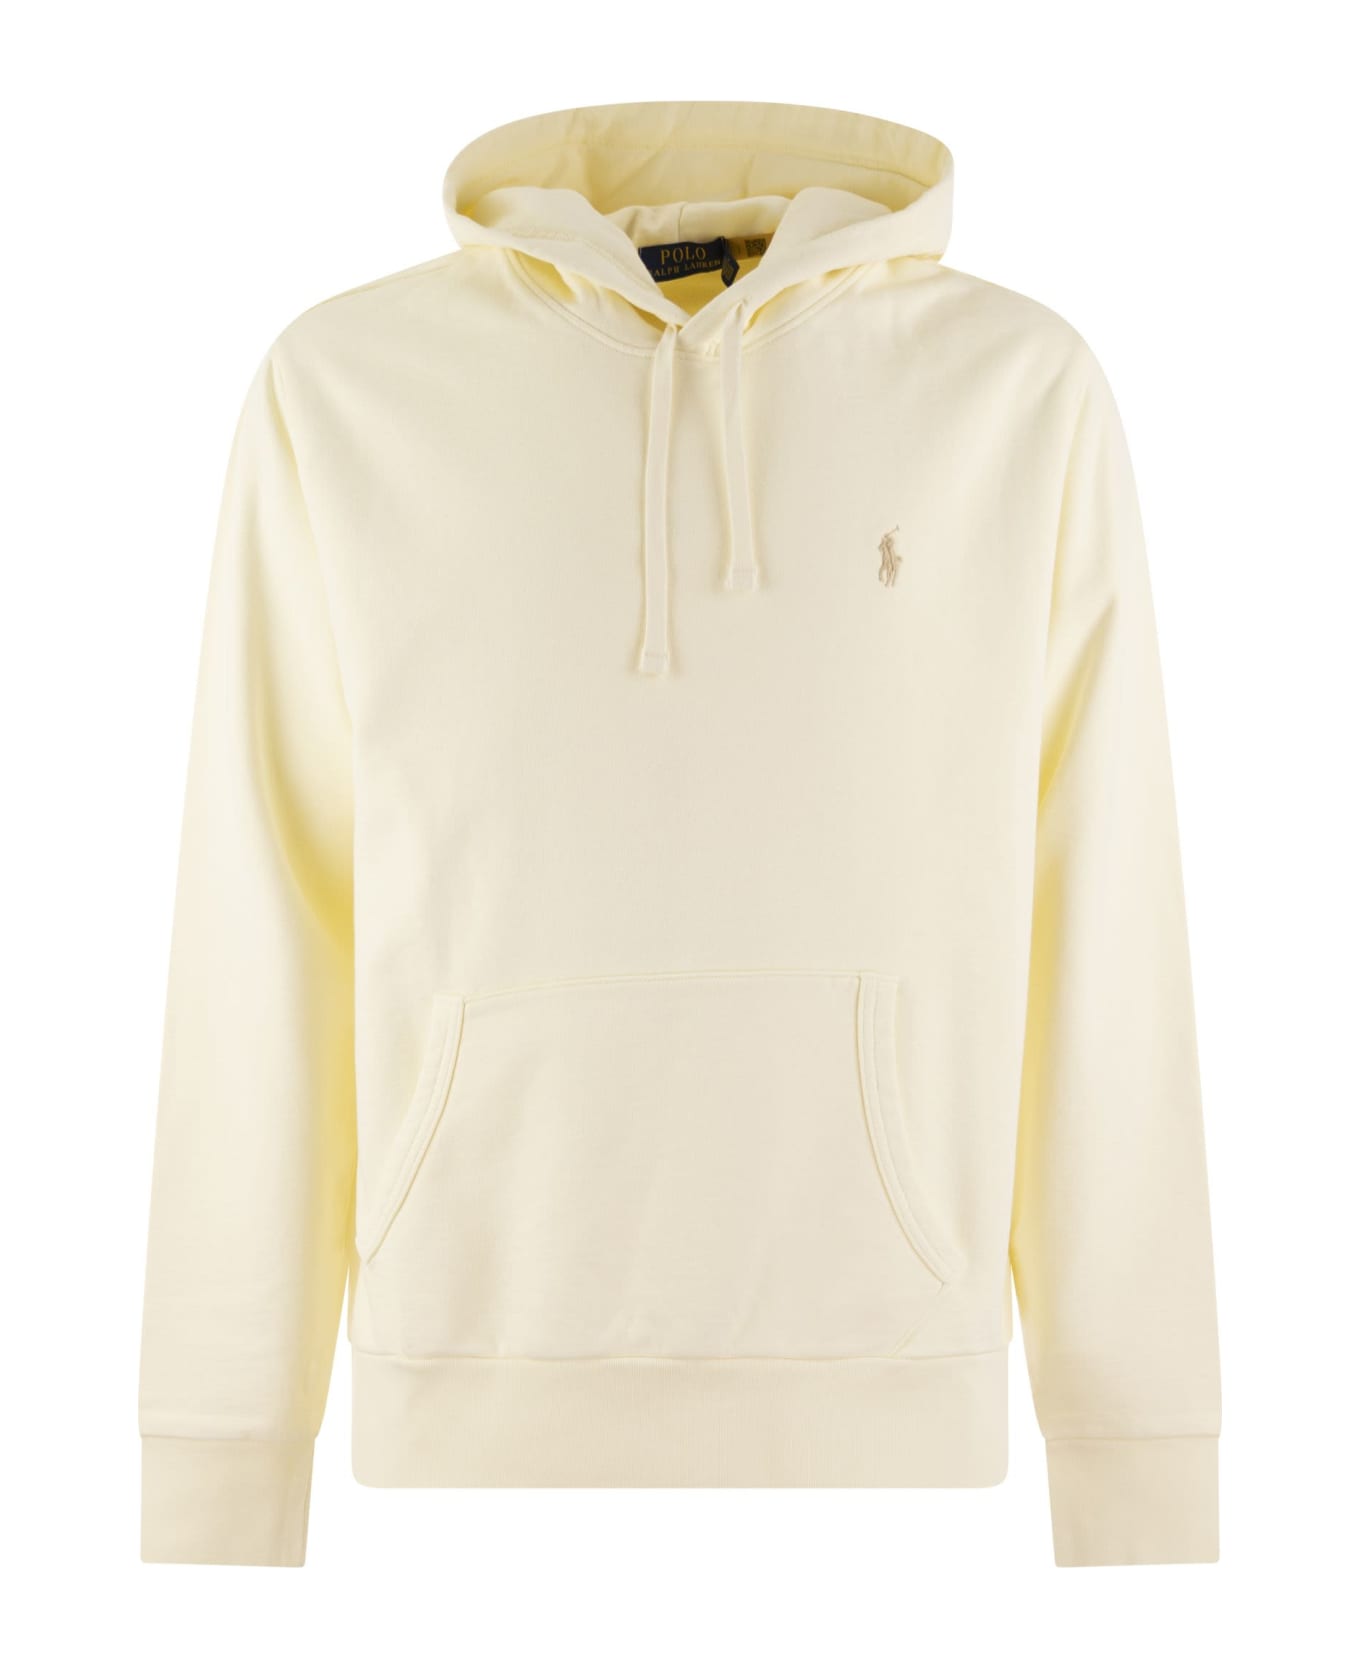 Polo Ralph Lauren Pony Embroidered Drawstring Hoodie - White フリース